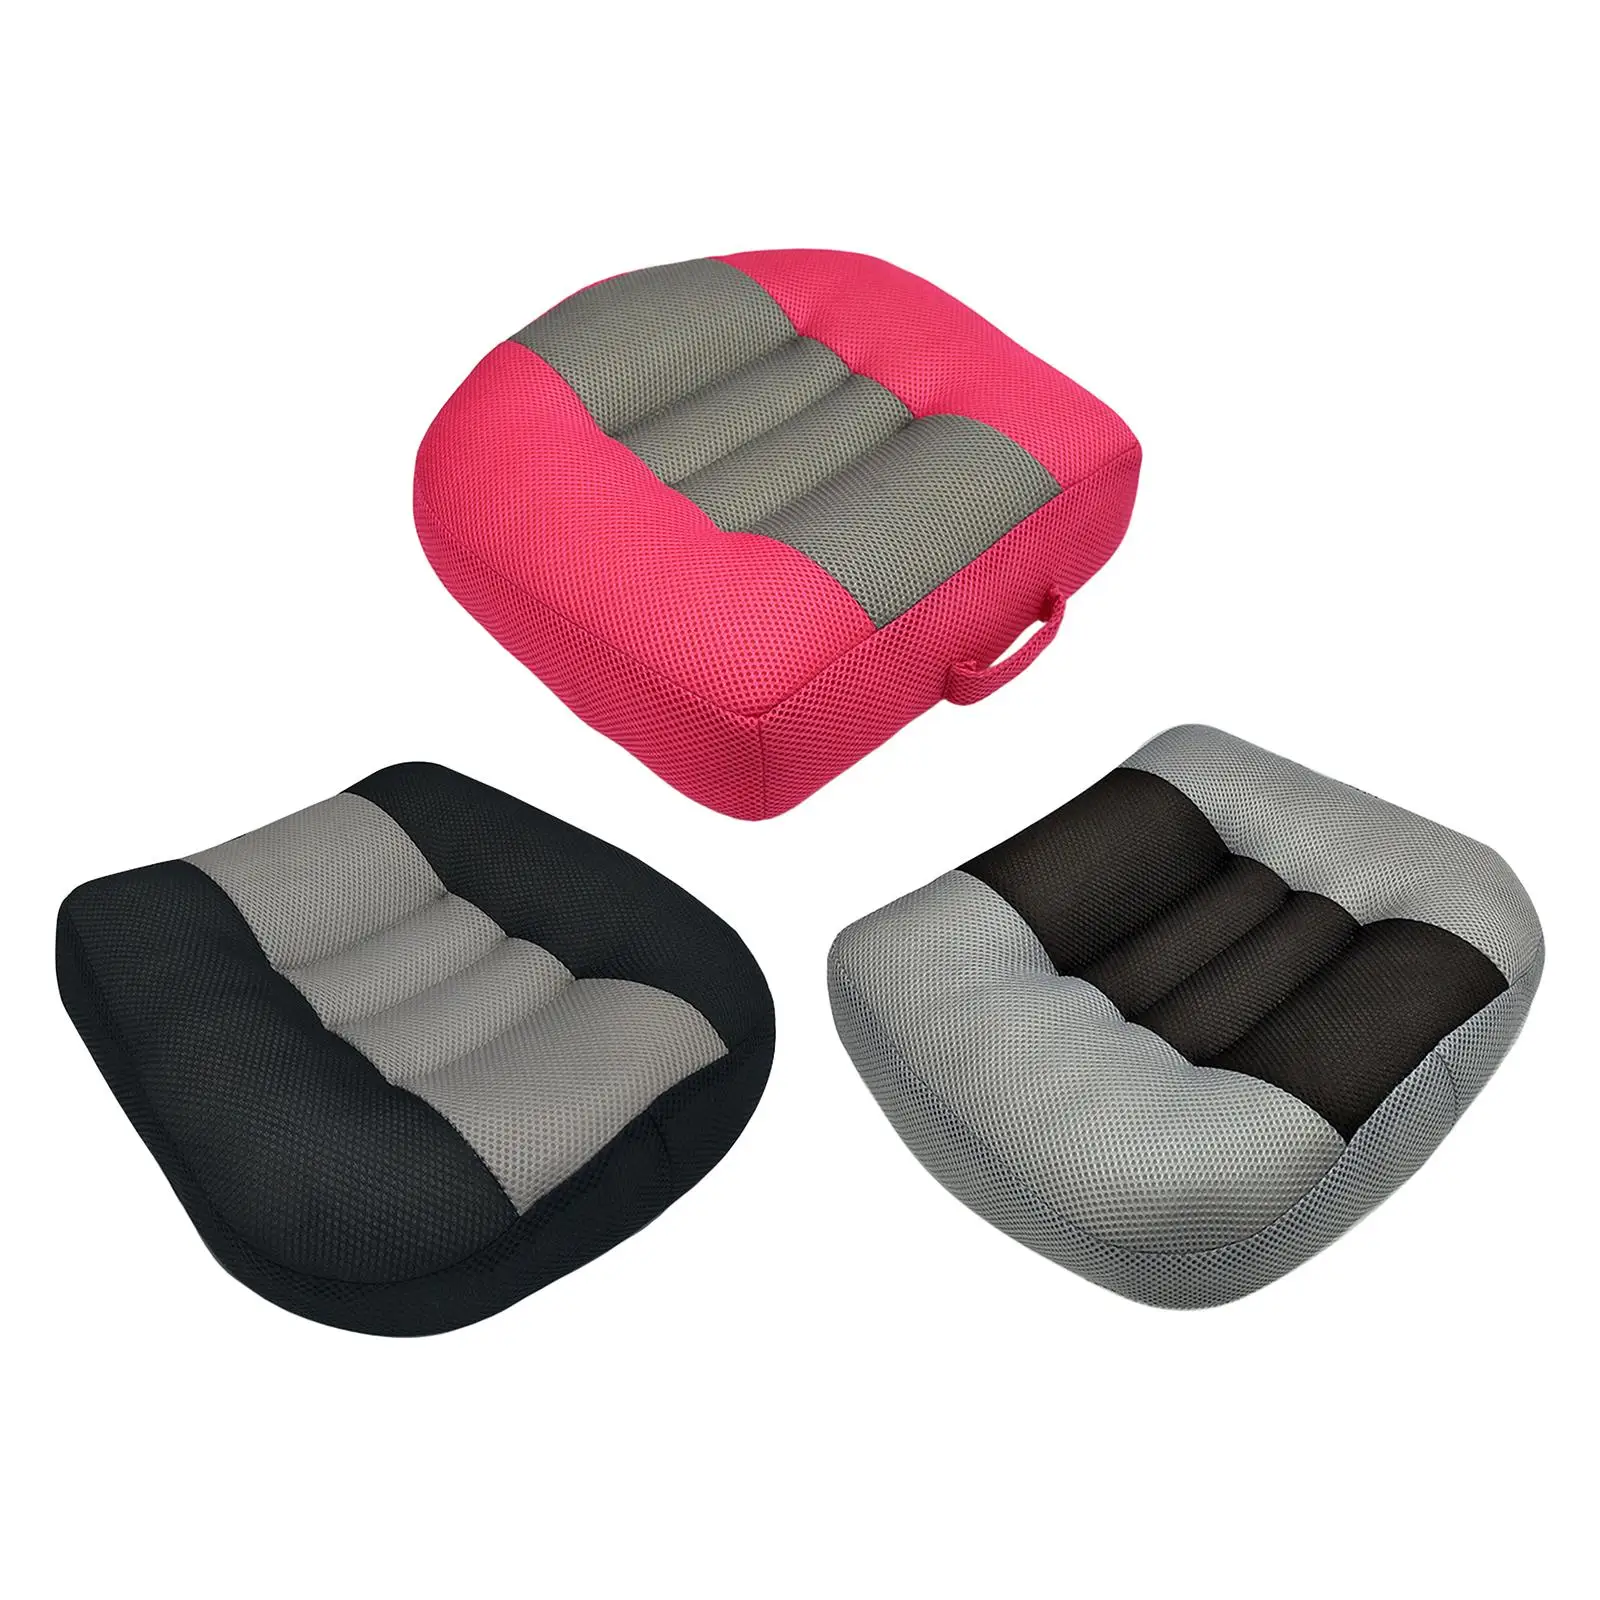 https://ae01.alicdn.com/kf/Sb3bc632931e341db9c6aaed76165c0b0Z/Portable-Car-Booster-Seat-Cushion-Thickened-Non-slip-Heightening-Boost-Mat-Breathable-Mesh-Lift-Seat-Pad.jpg